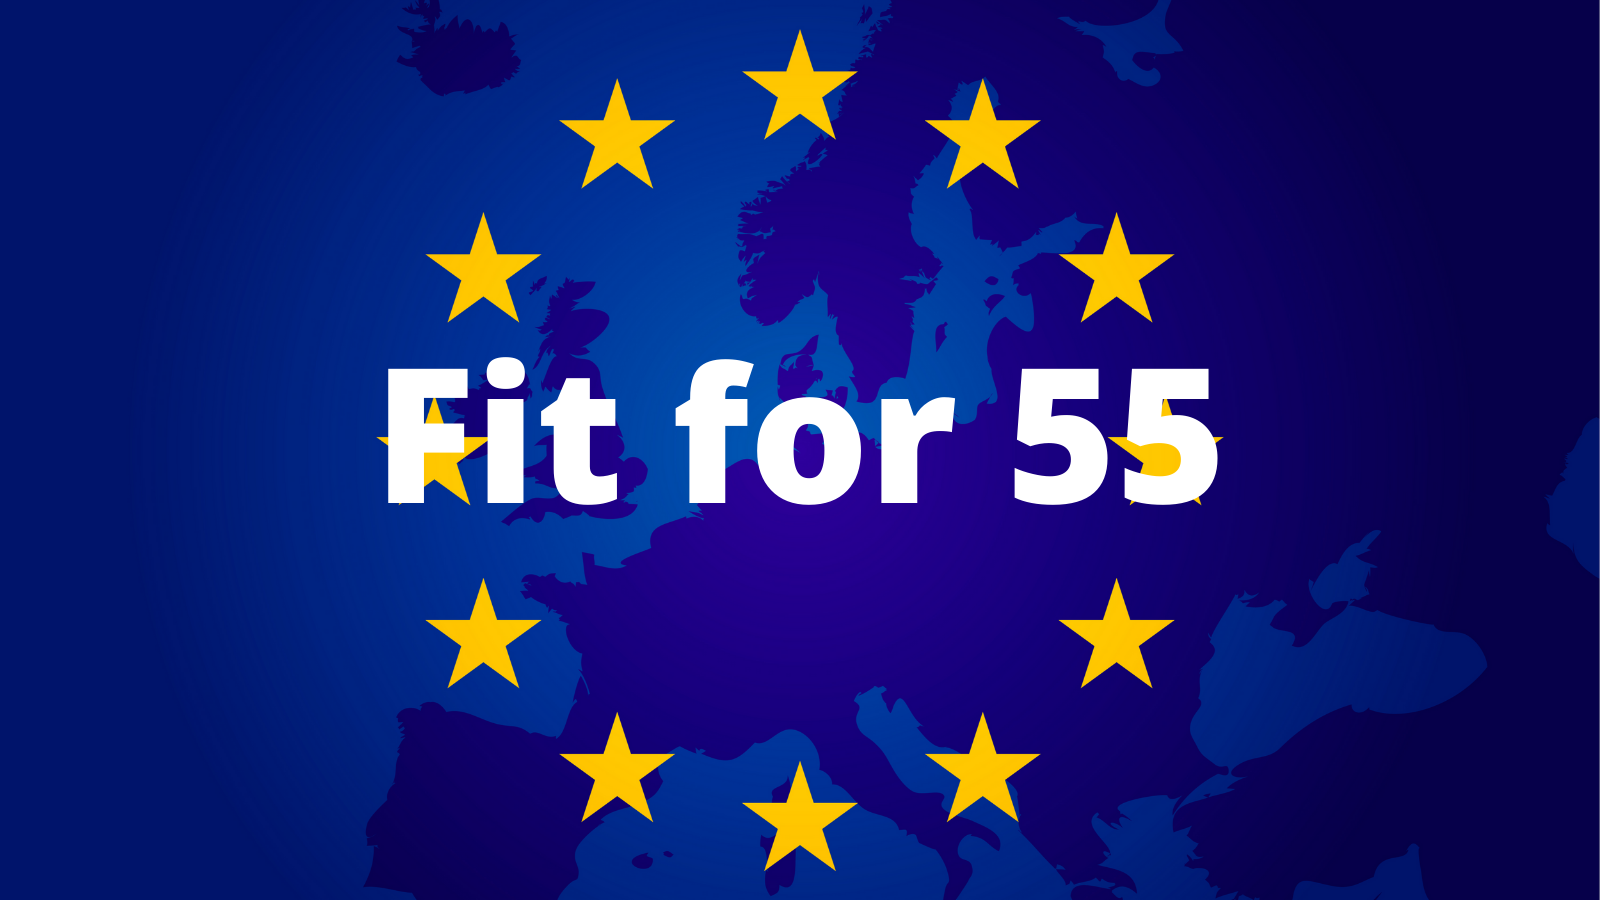 The EU's industrial policy framework: is it fit for 55? Trade unions' serious concerns about the implementation of the promised Just Transition